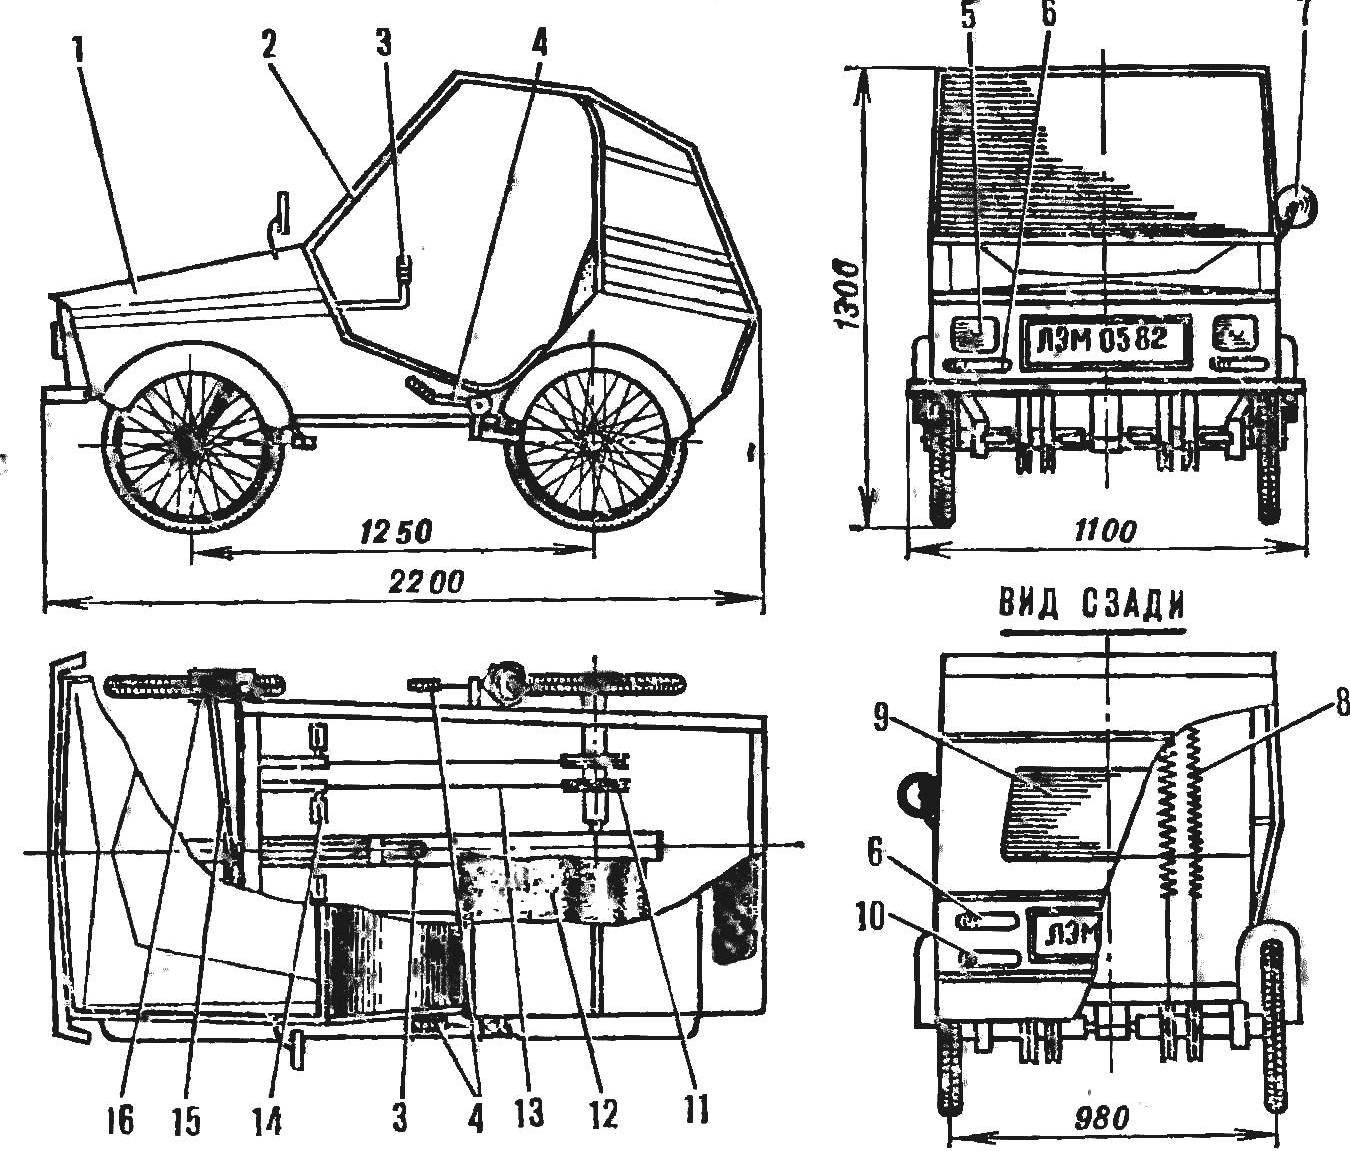 Fig. 1. The dimensions and the overall layout of the velomobile